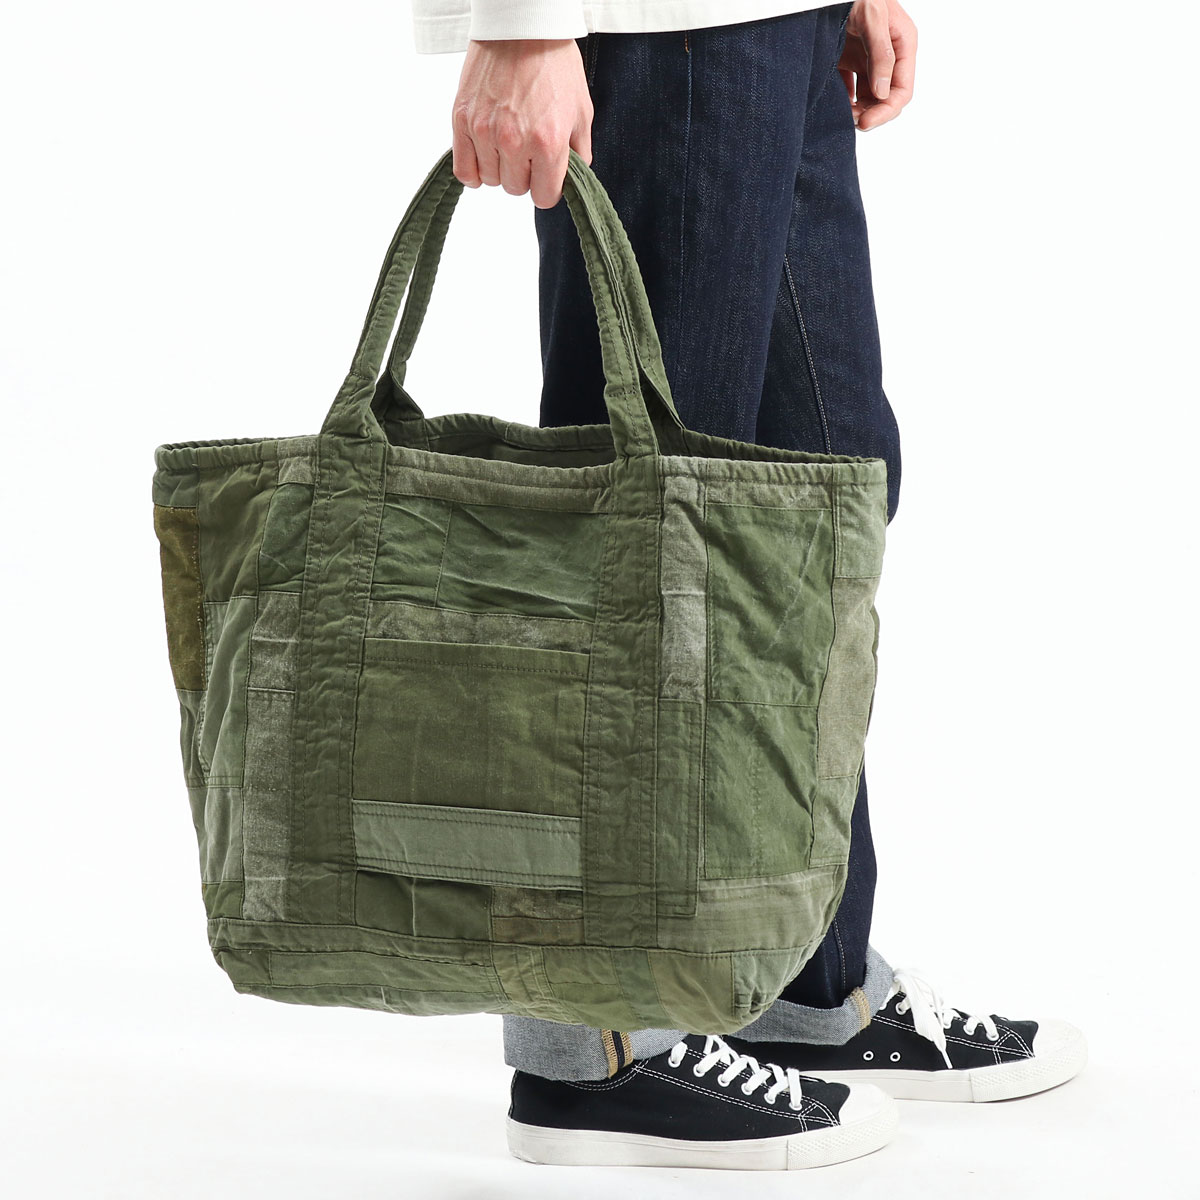 hobo ホーボー CARRY-ALL TOTE L UPCYCLED US ARMY CLOTH 29L HB